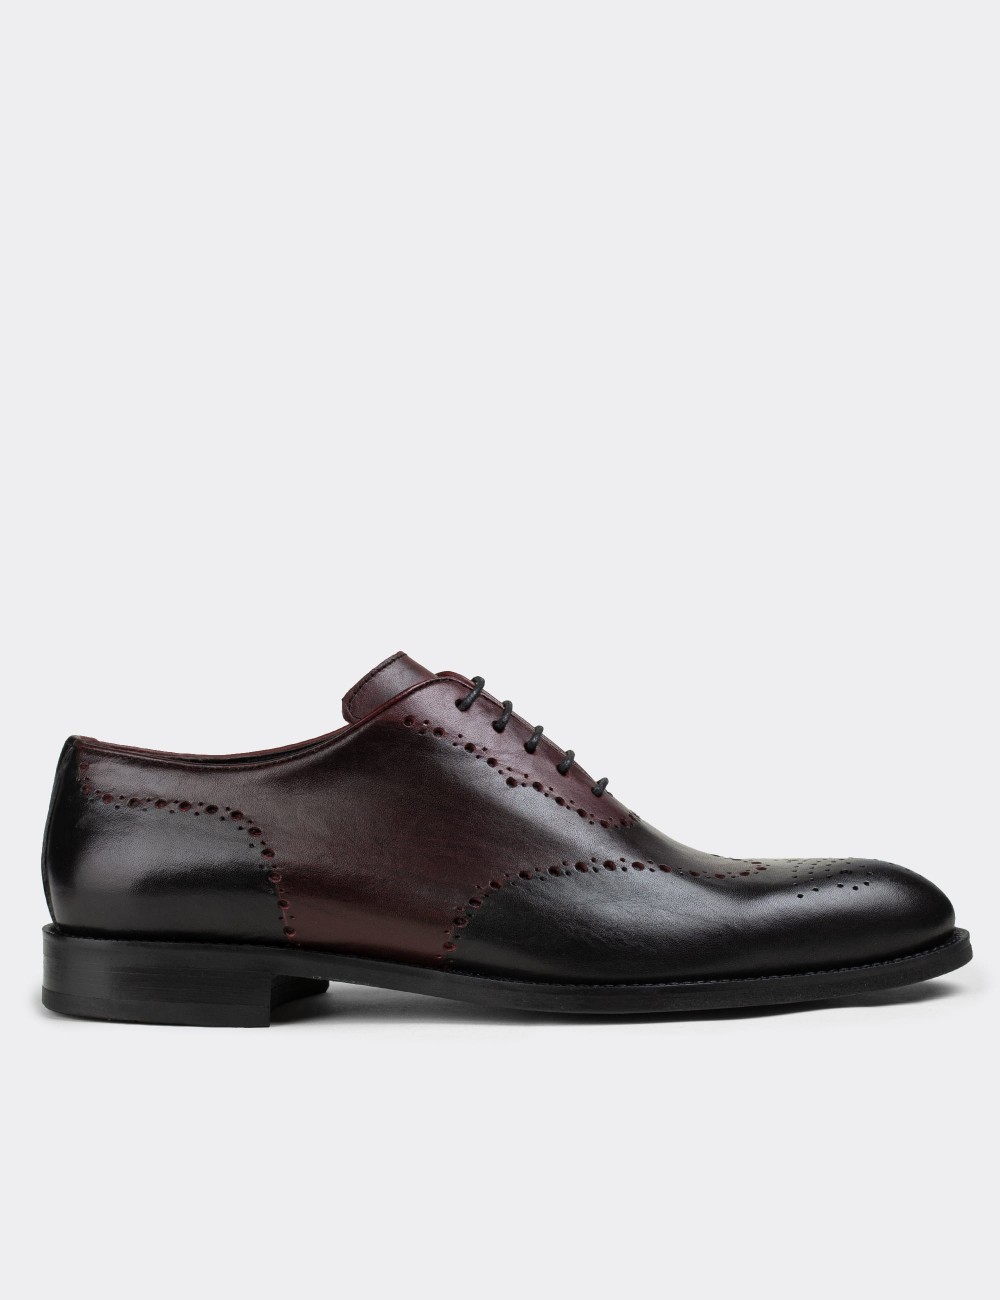 Burgundy  Leather Classic Shoes - 01684MBRDM01